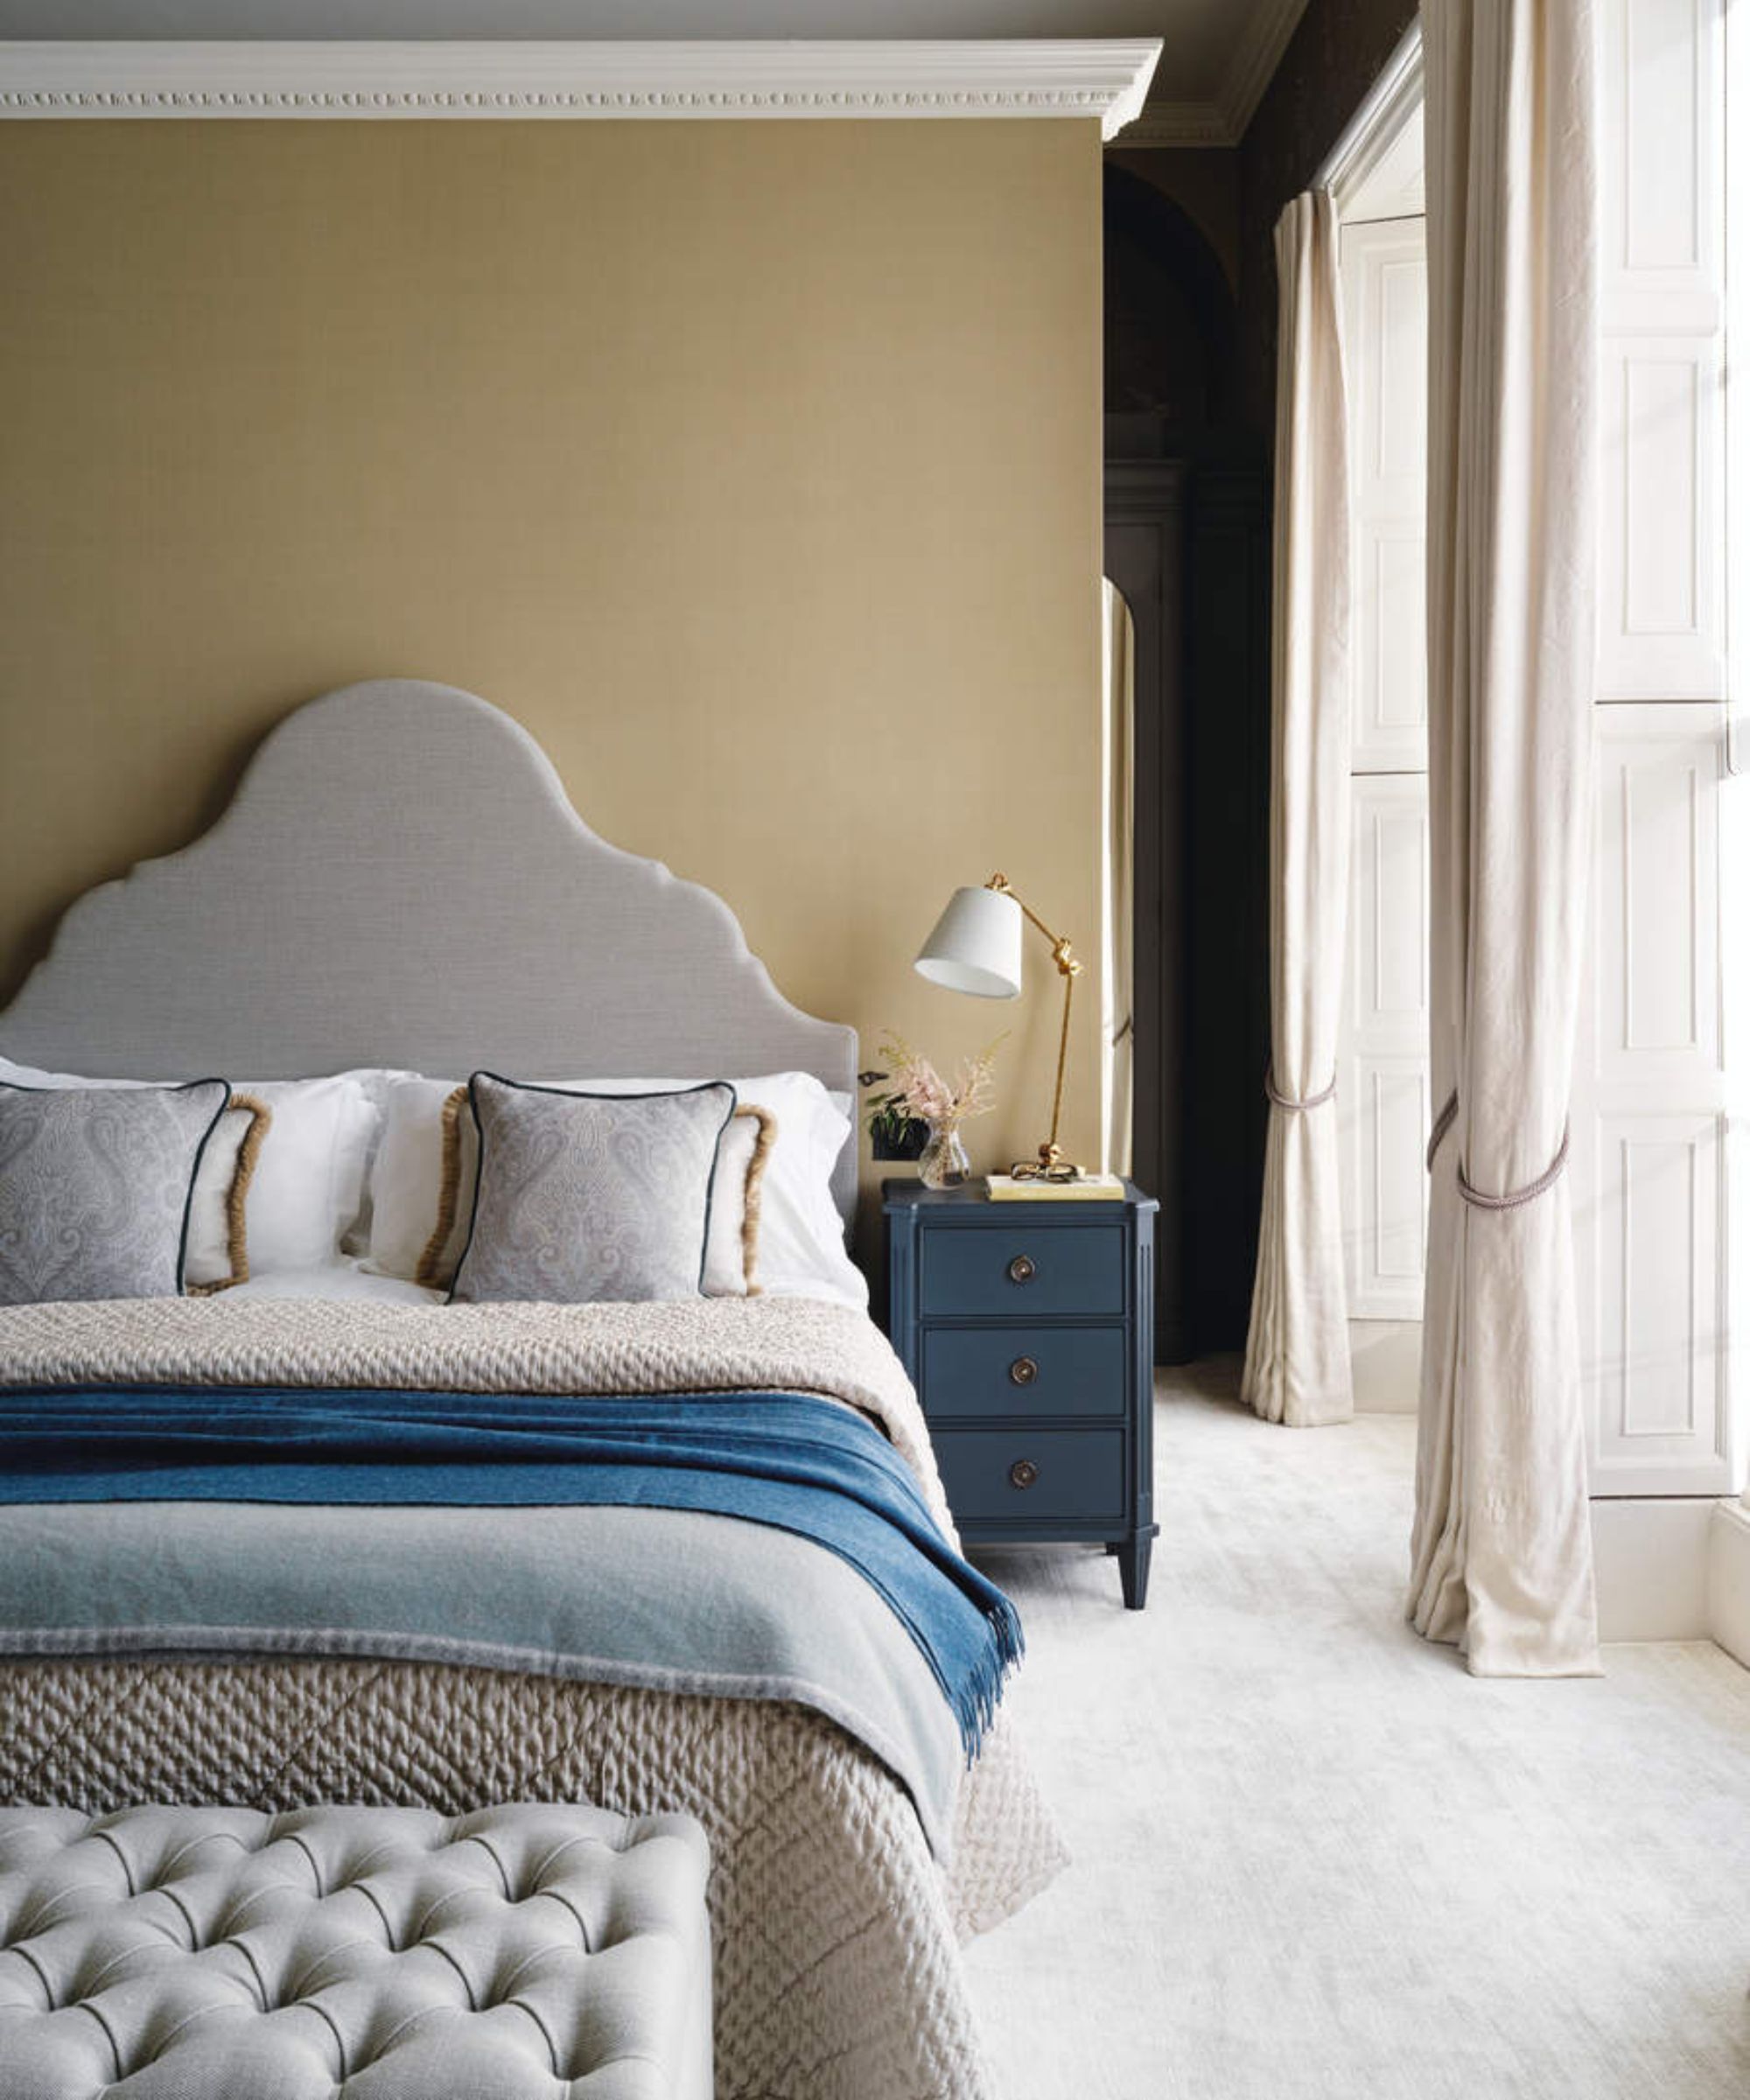 Beige bedroom with gray and blue accessories